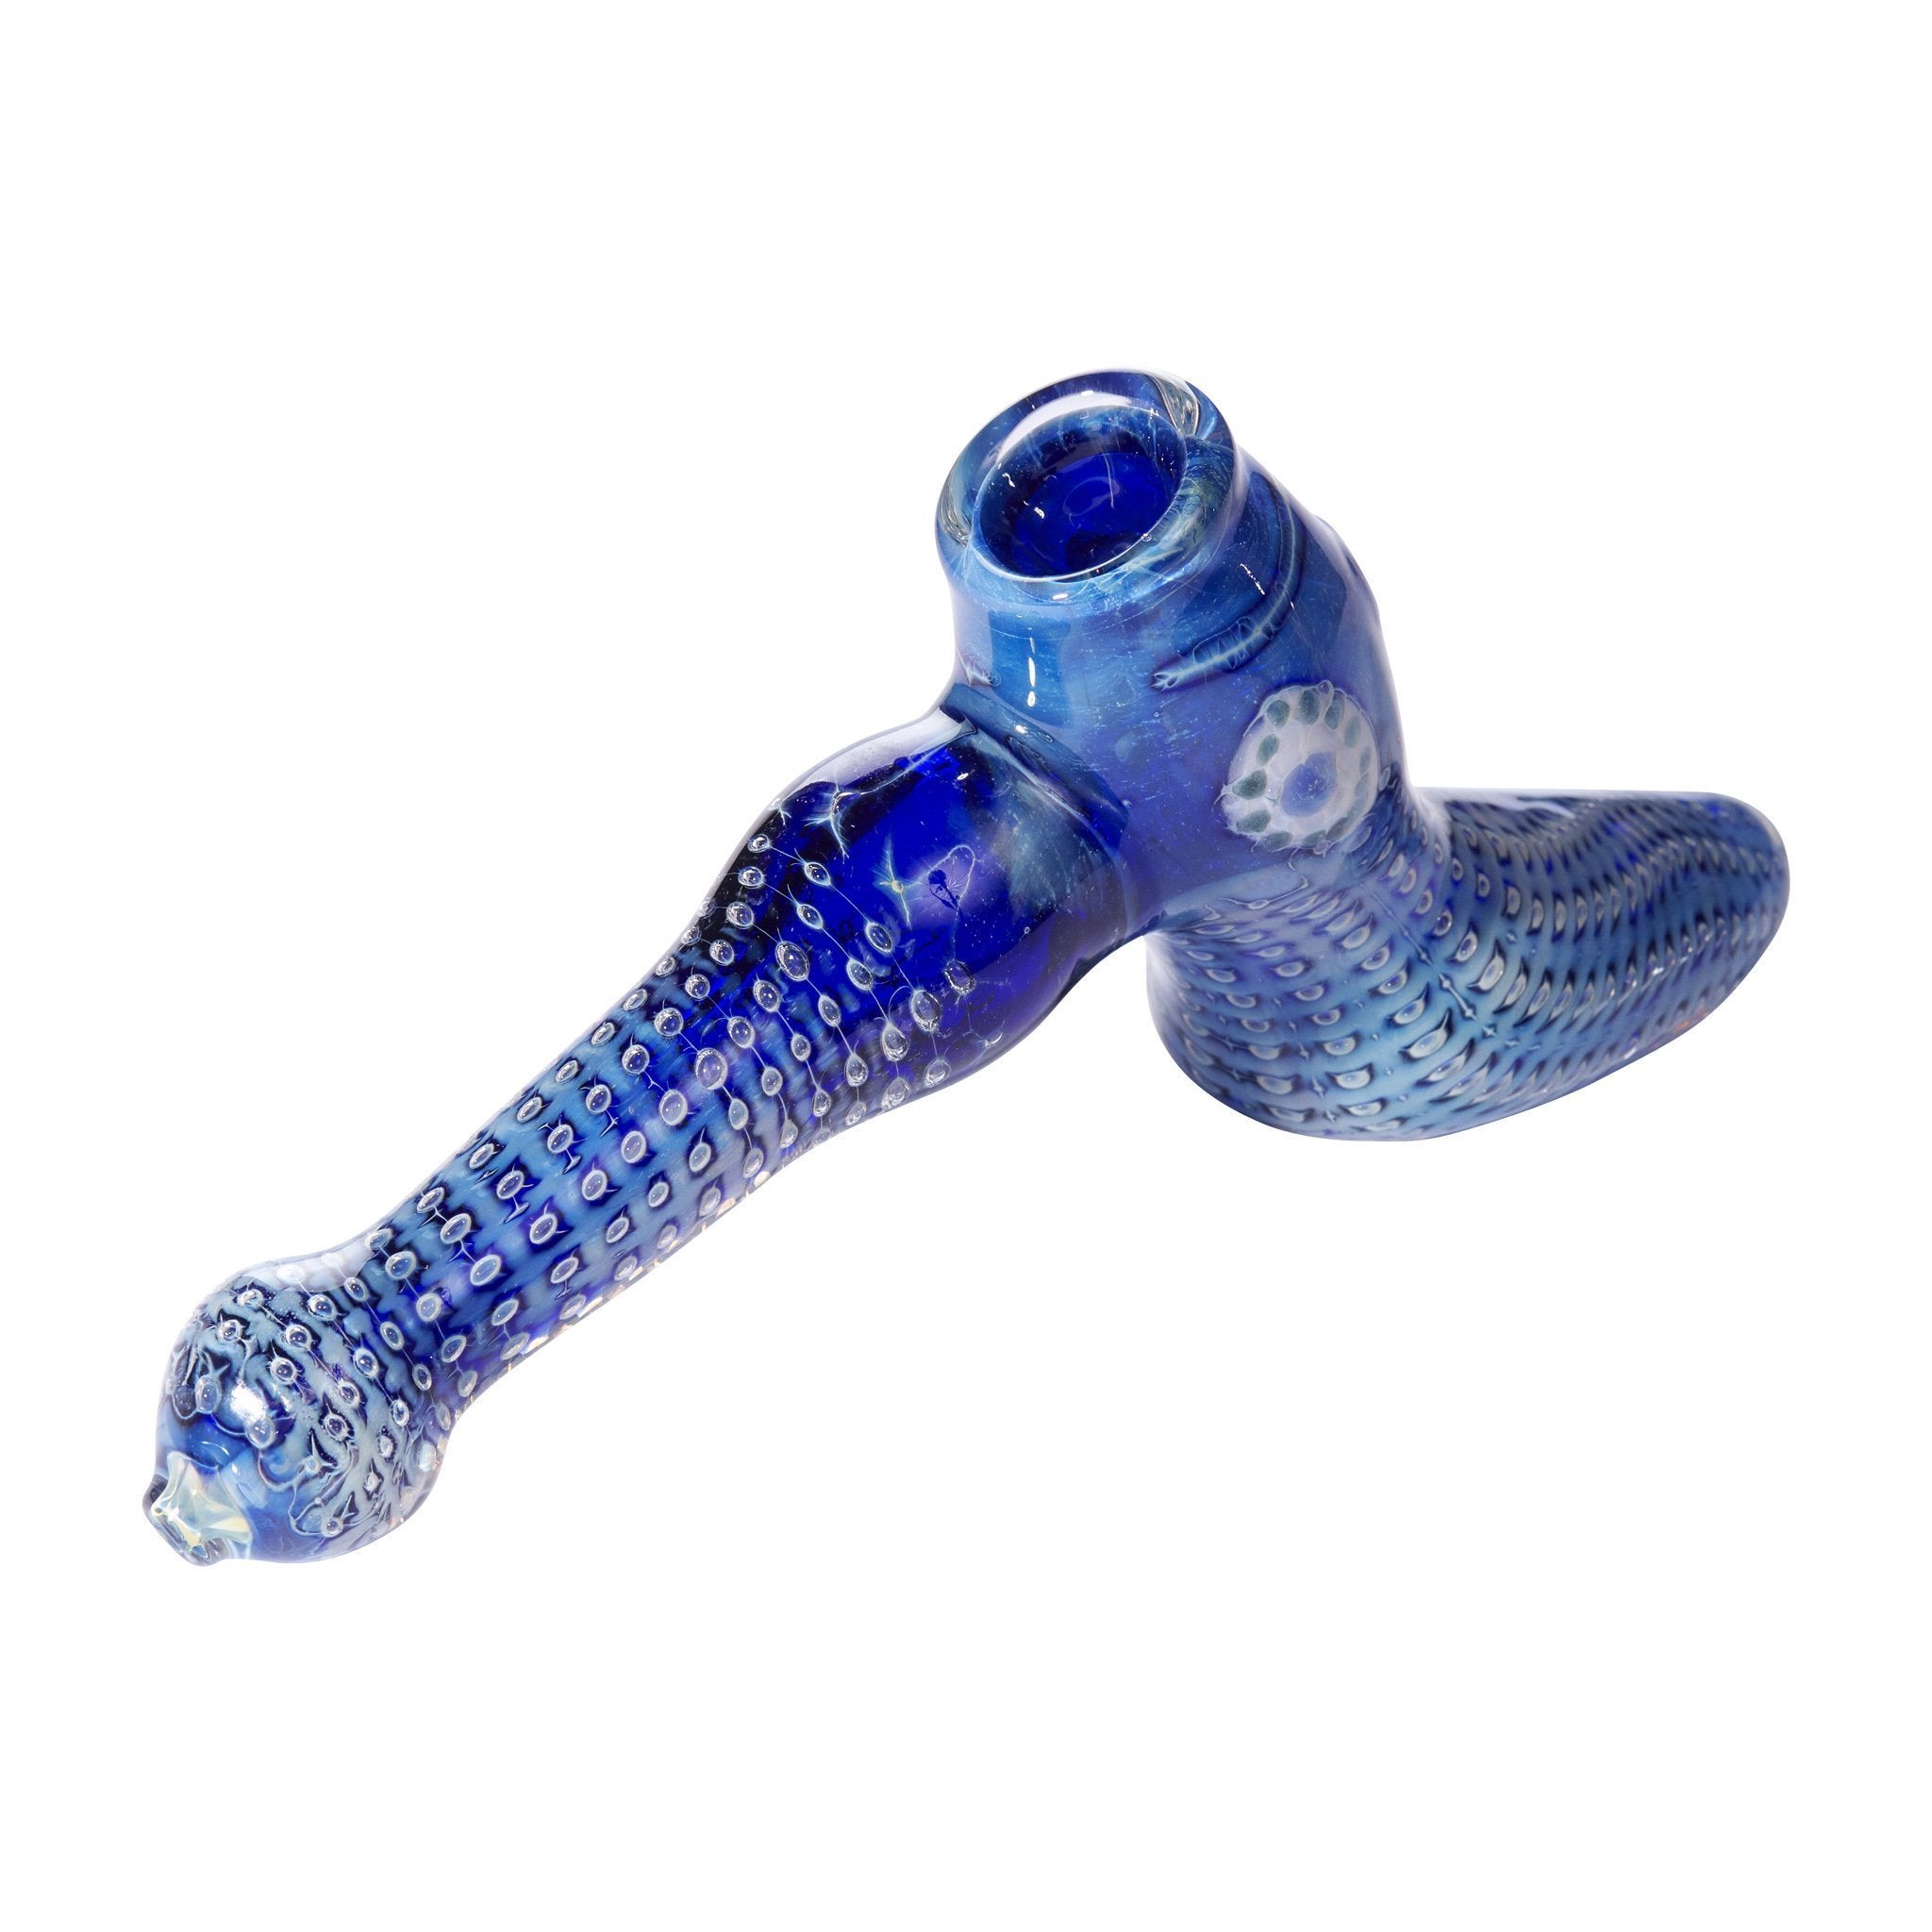 Double Trouble Bubbler - 7in - Everything 420